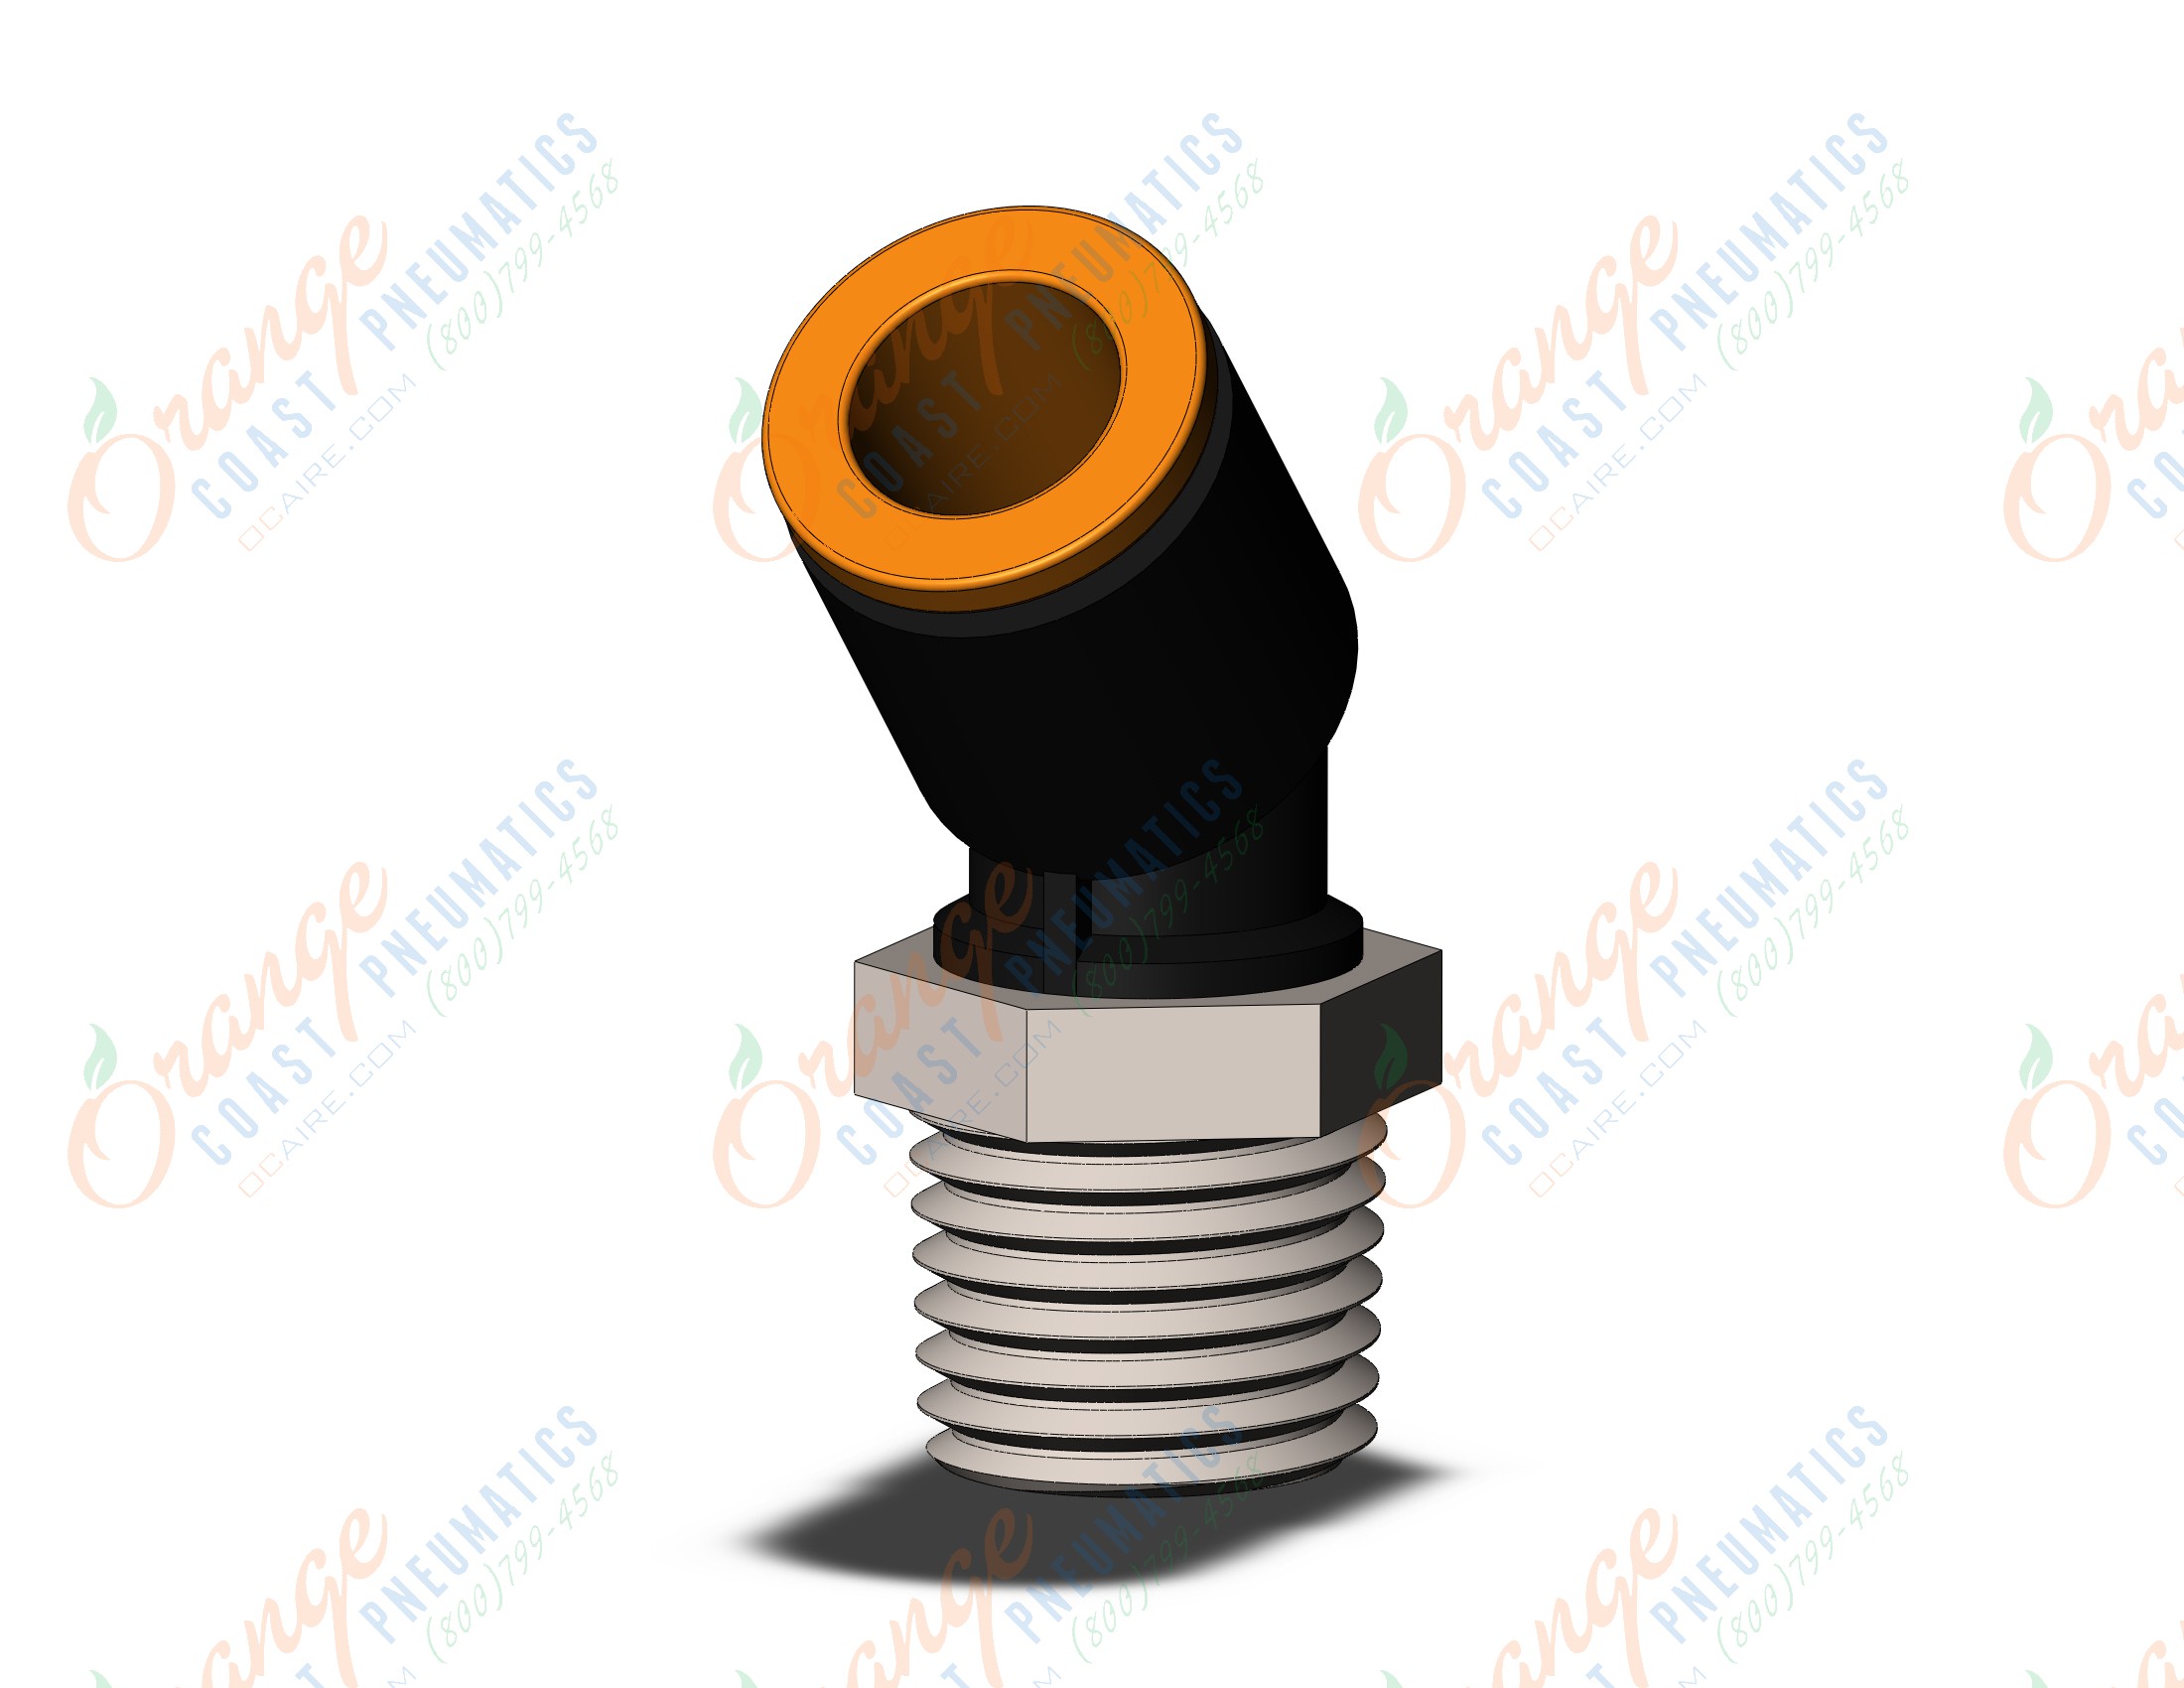 SMC KQ2K09-35NS-X35 fitting, 45 deg male elbow, ONE-TOUCH FITTING (sold in packages of 10; price is per piece)